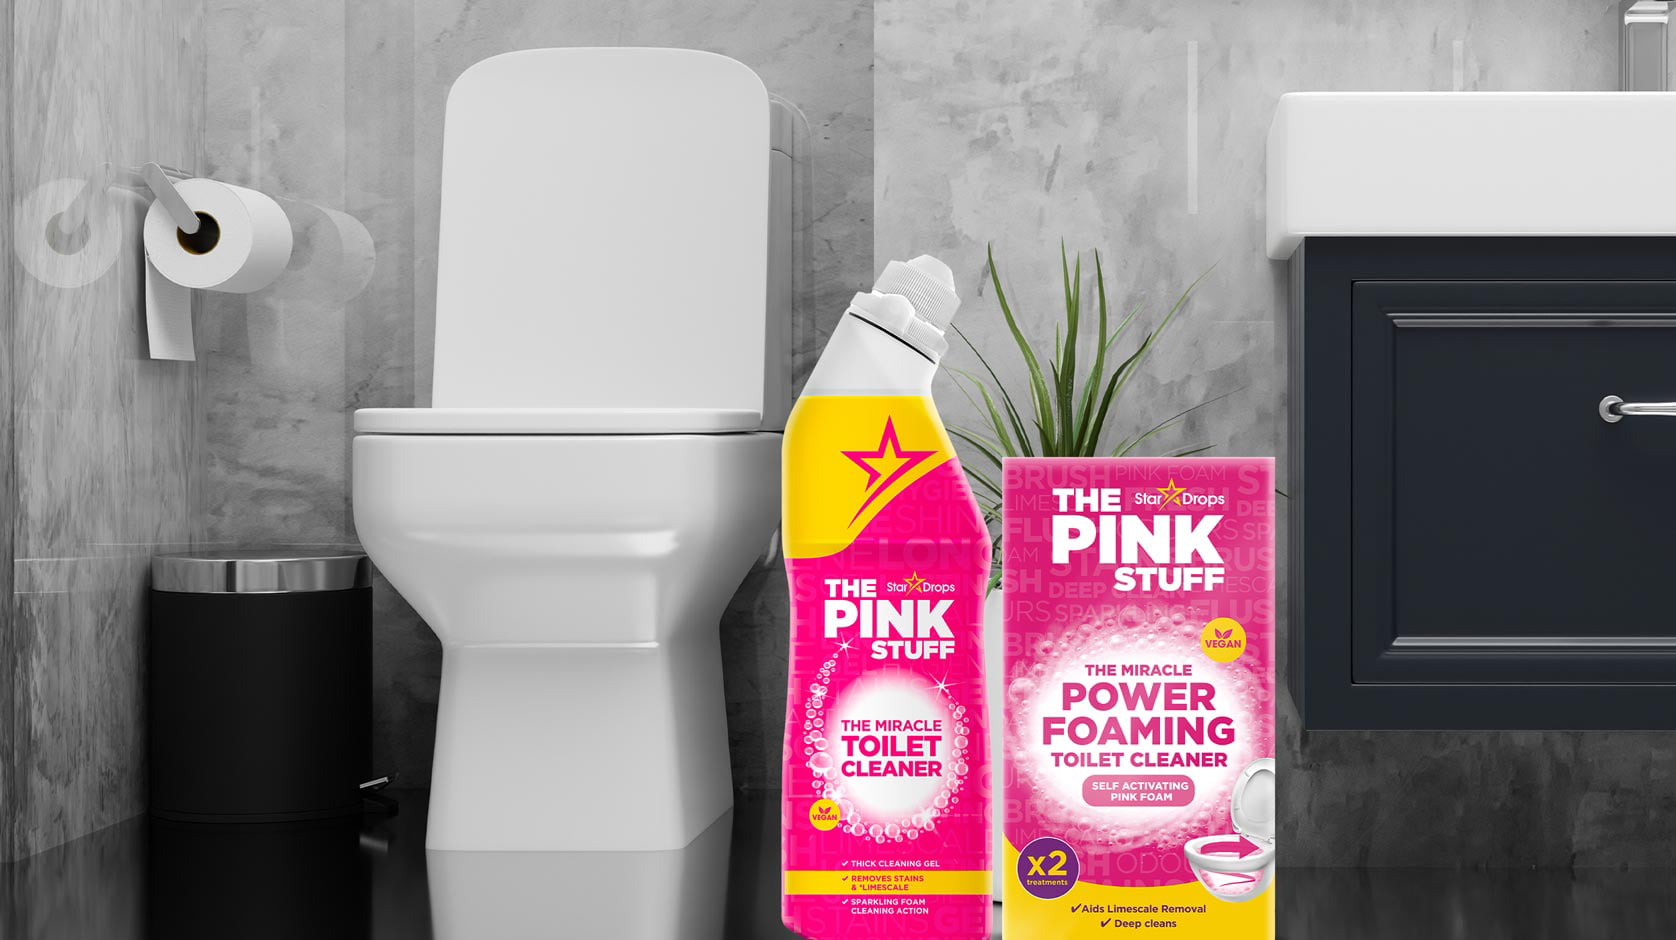 Foaming Toilet Cleaner - The Pink Stuff